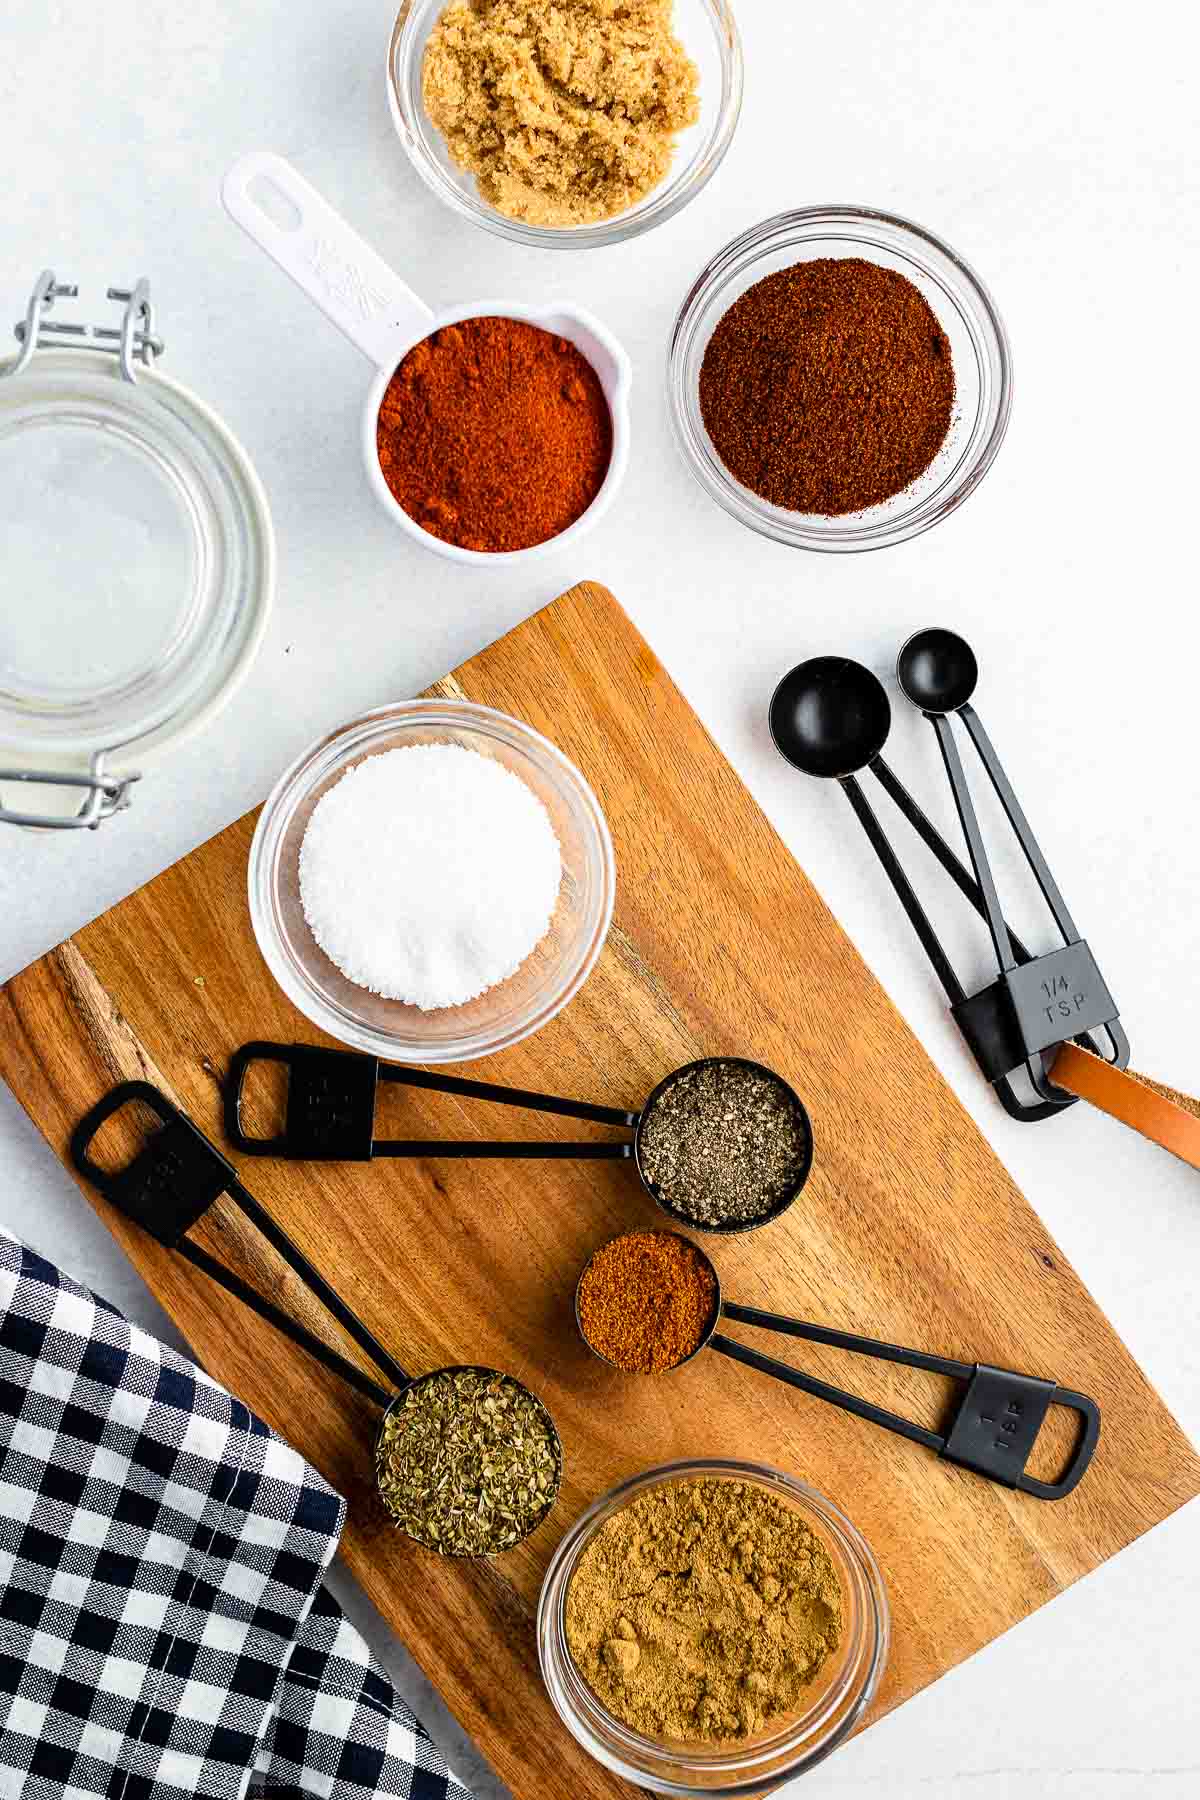 ingredients for dry rub for ribs in small bowls and measuring spoons